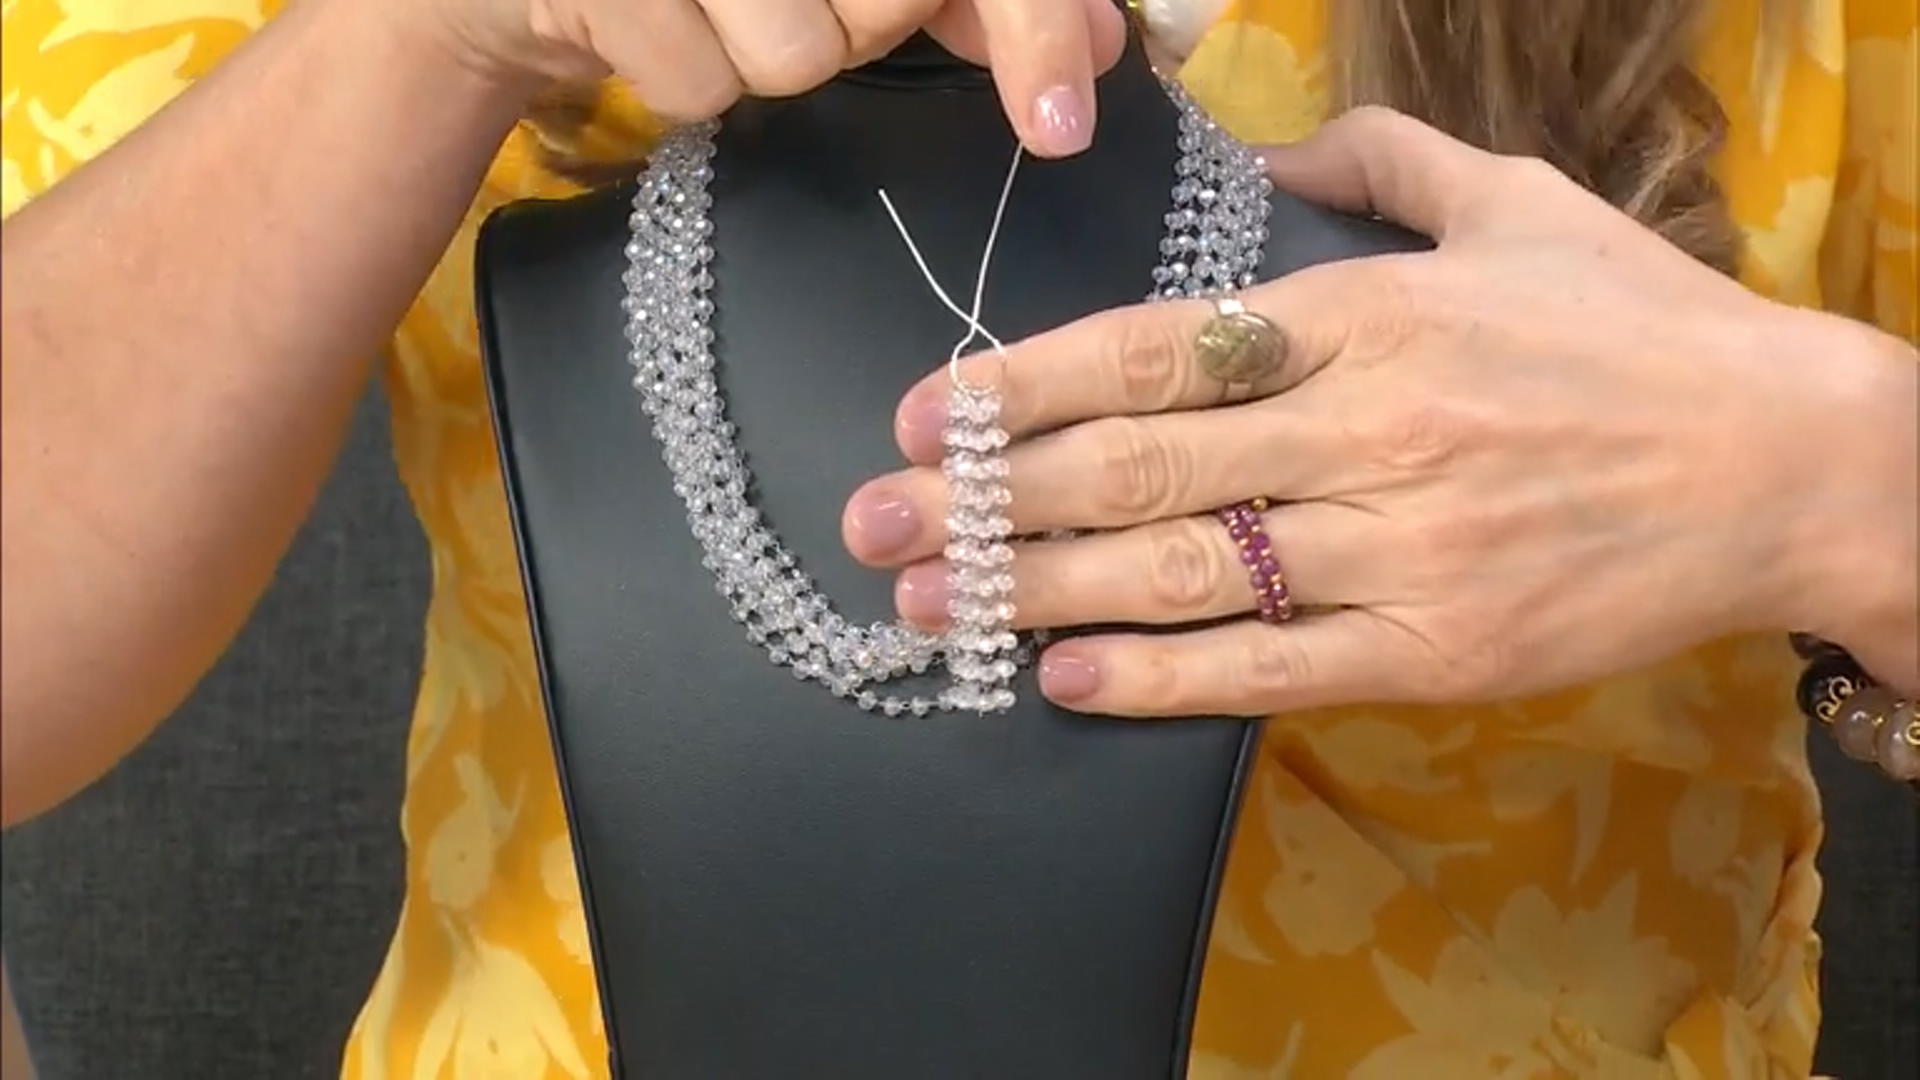 Stainless Steel Chain appx 3M with Round Crystal Glass Beads and Findings appx 15 Pieces Total Video Thumbnail